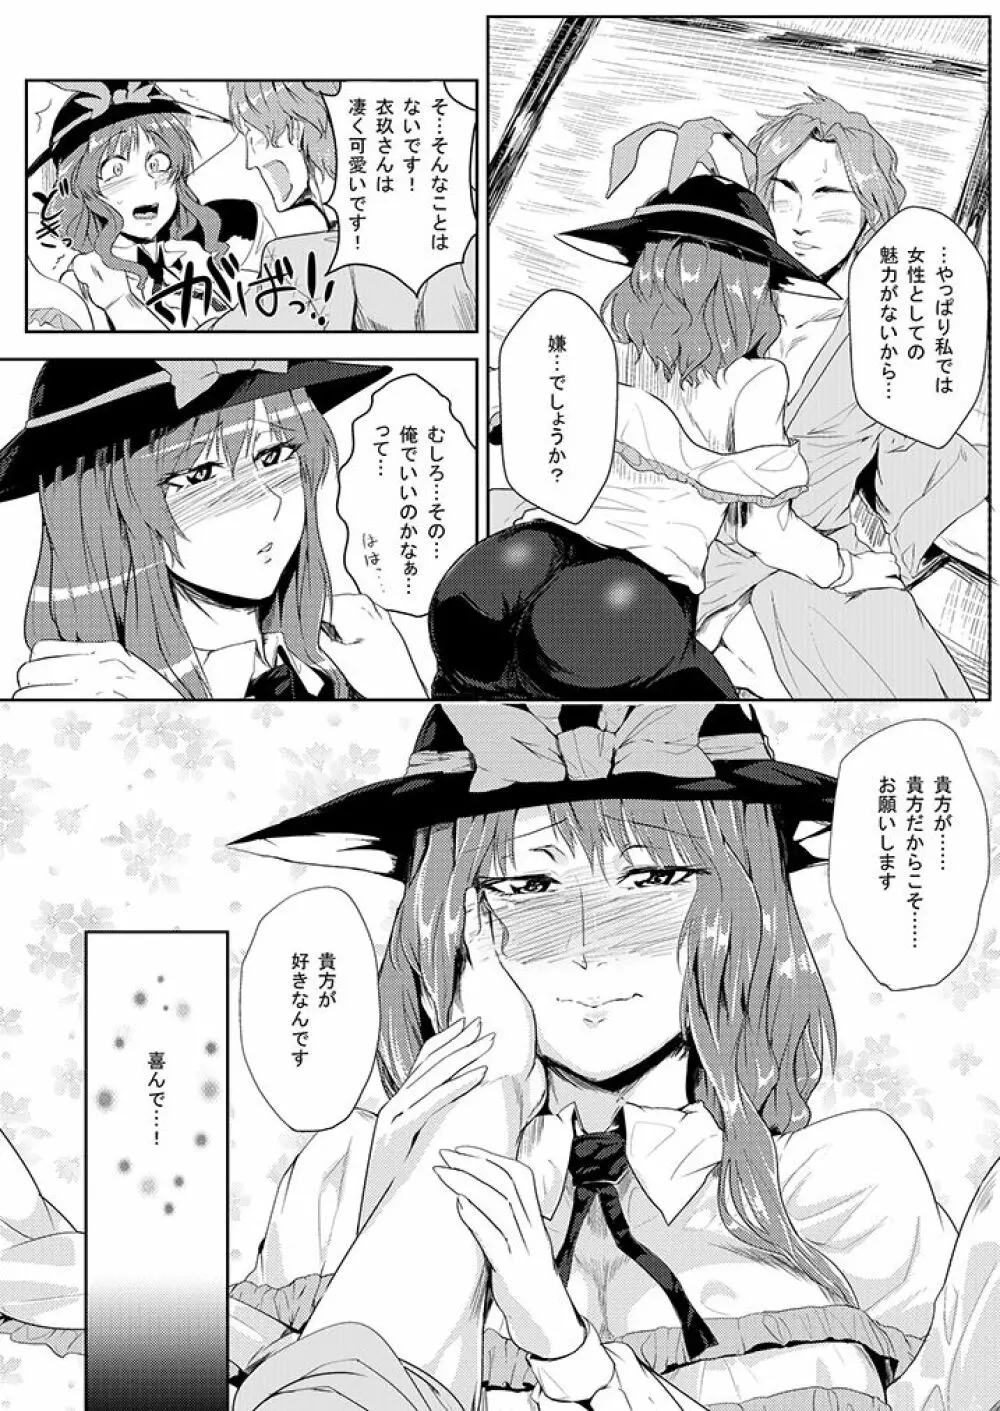 SAKUYA MAID in HEAVEN/ALL IN 1 - page420